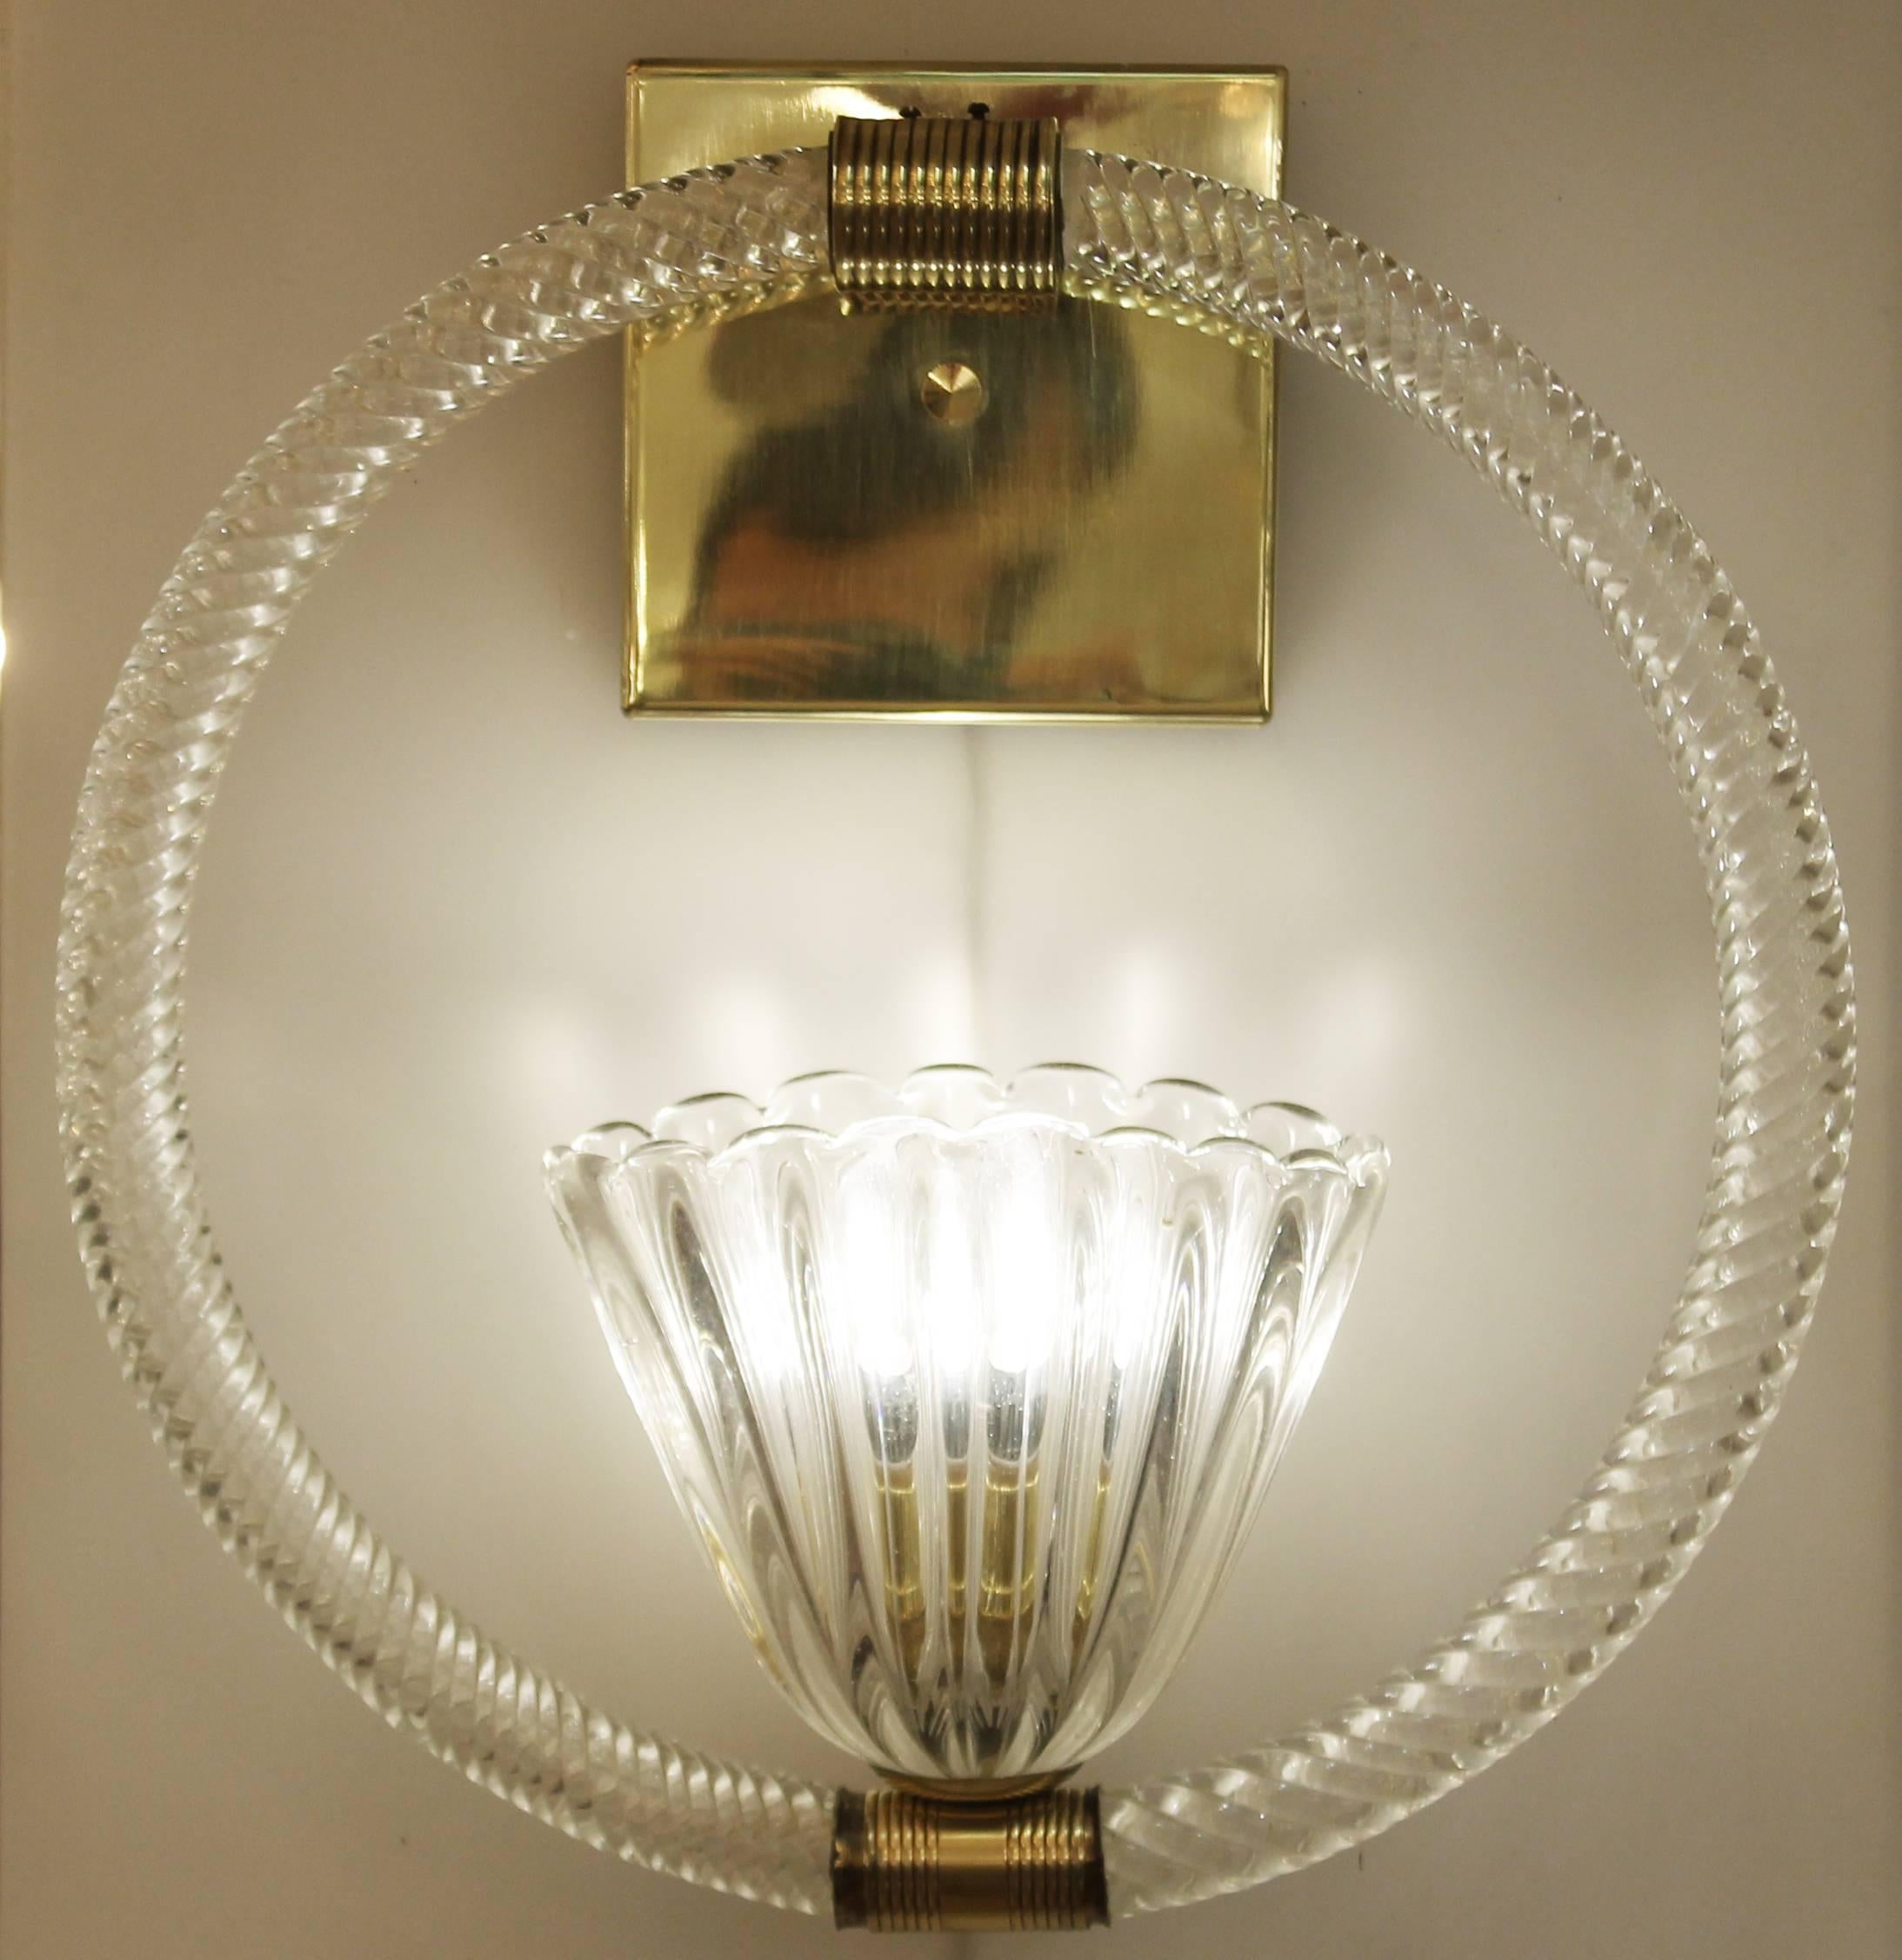 Each sconce is composed of a glass shade connected to the backplate by a glass loop. The glass is clear and textured while the backplate and junctions are brass. The flower shaped shade holds one regular E27 socket. Backplate can be tilted to use as